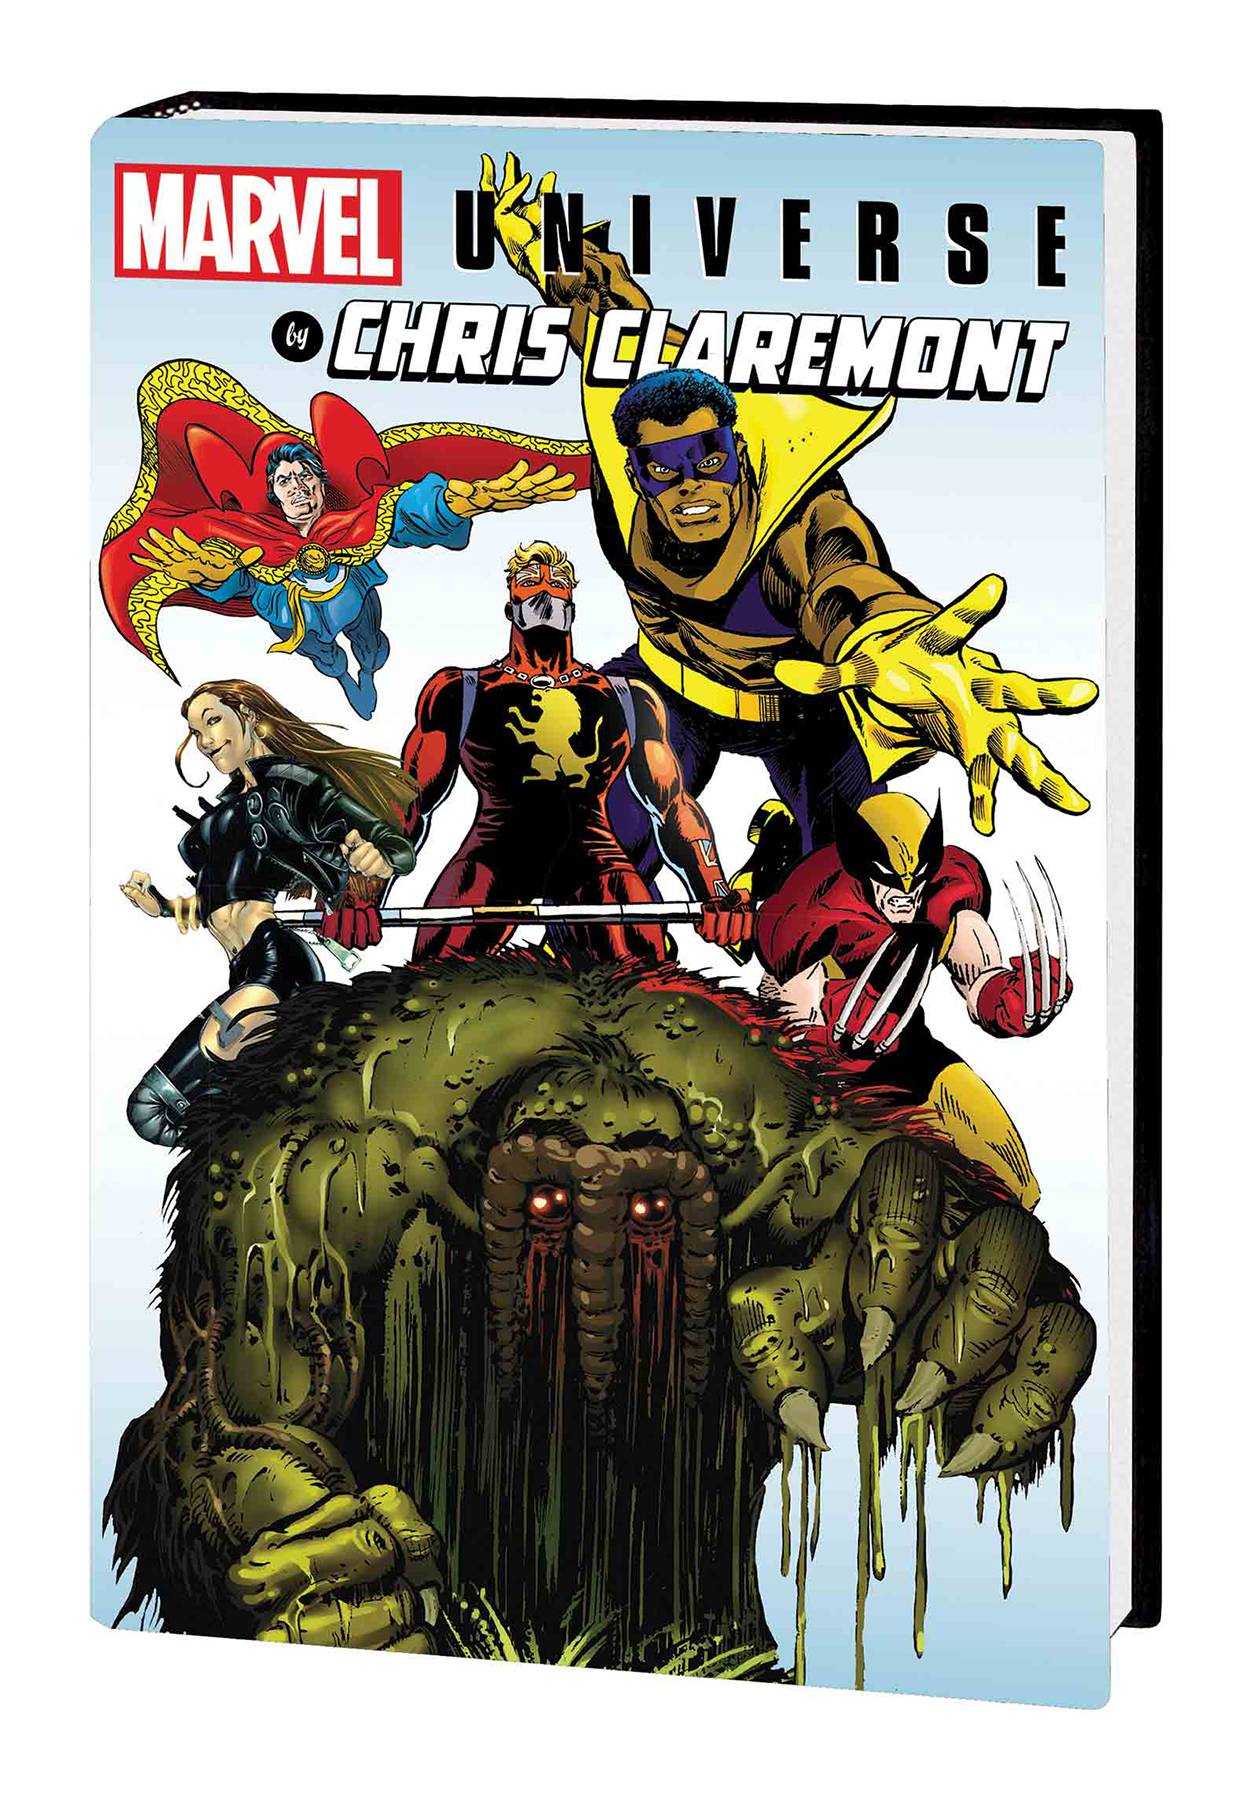 Marvel Universe by Chris Claremont Hardcover